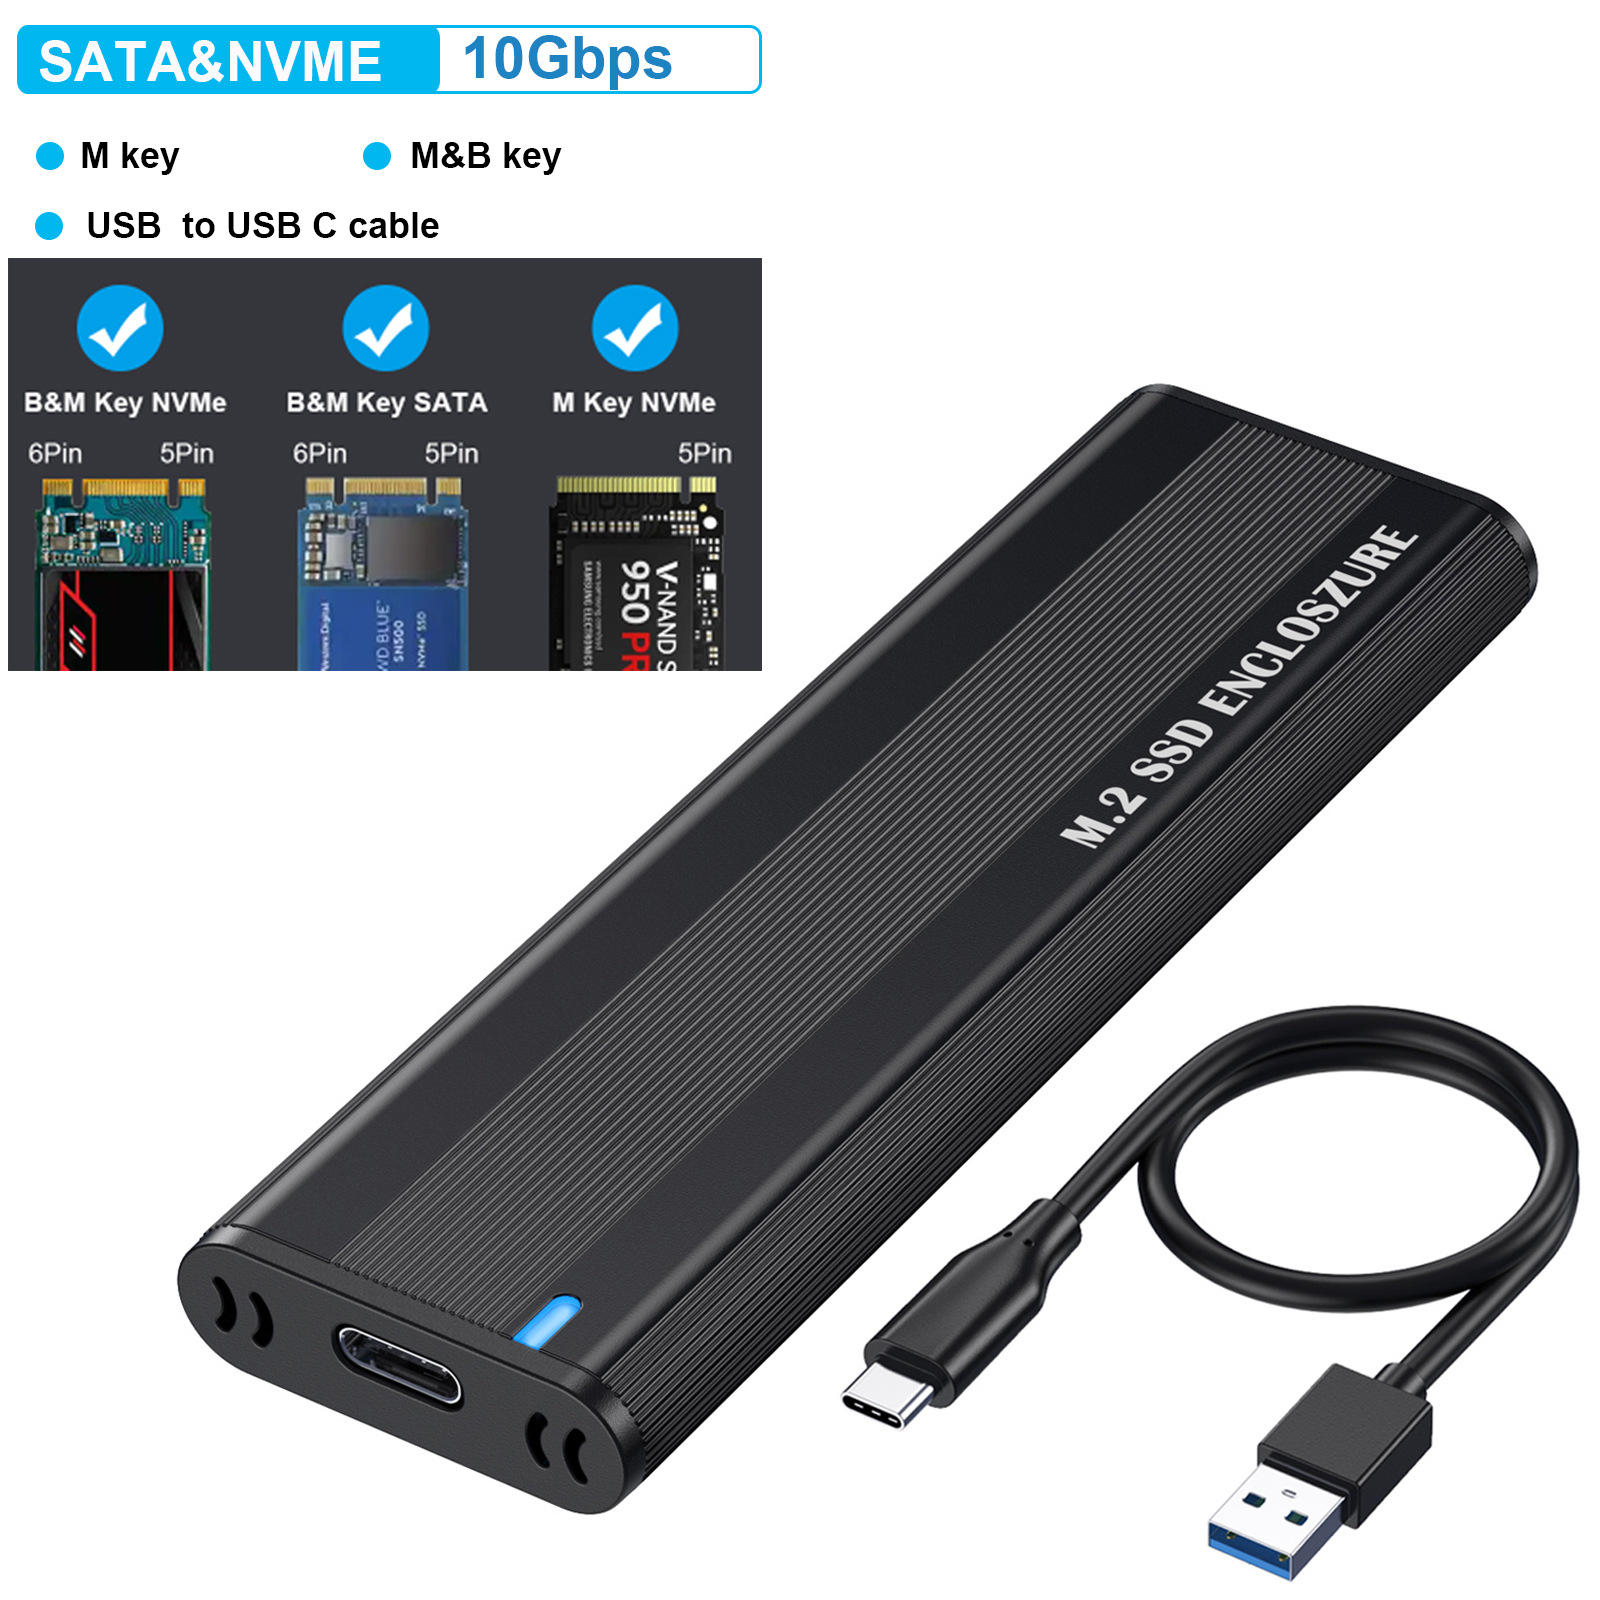 M.2 NVME SSD Case USB3.0 x2 Type-C M2 NVME SSD Enclosure 10Gbps For M.2 NVME 2242 2260 2280 SSD